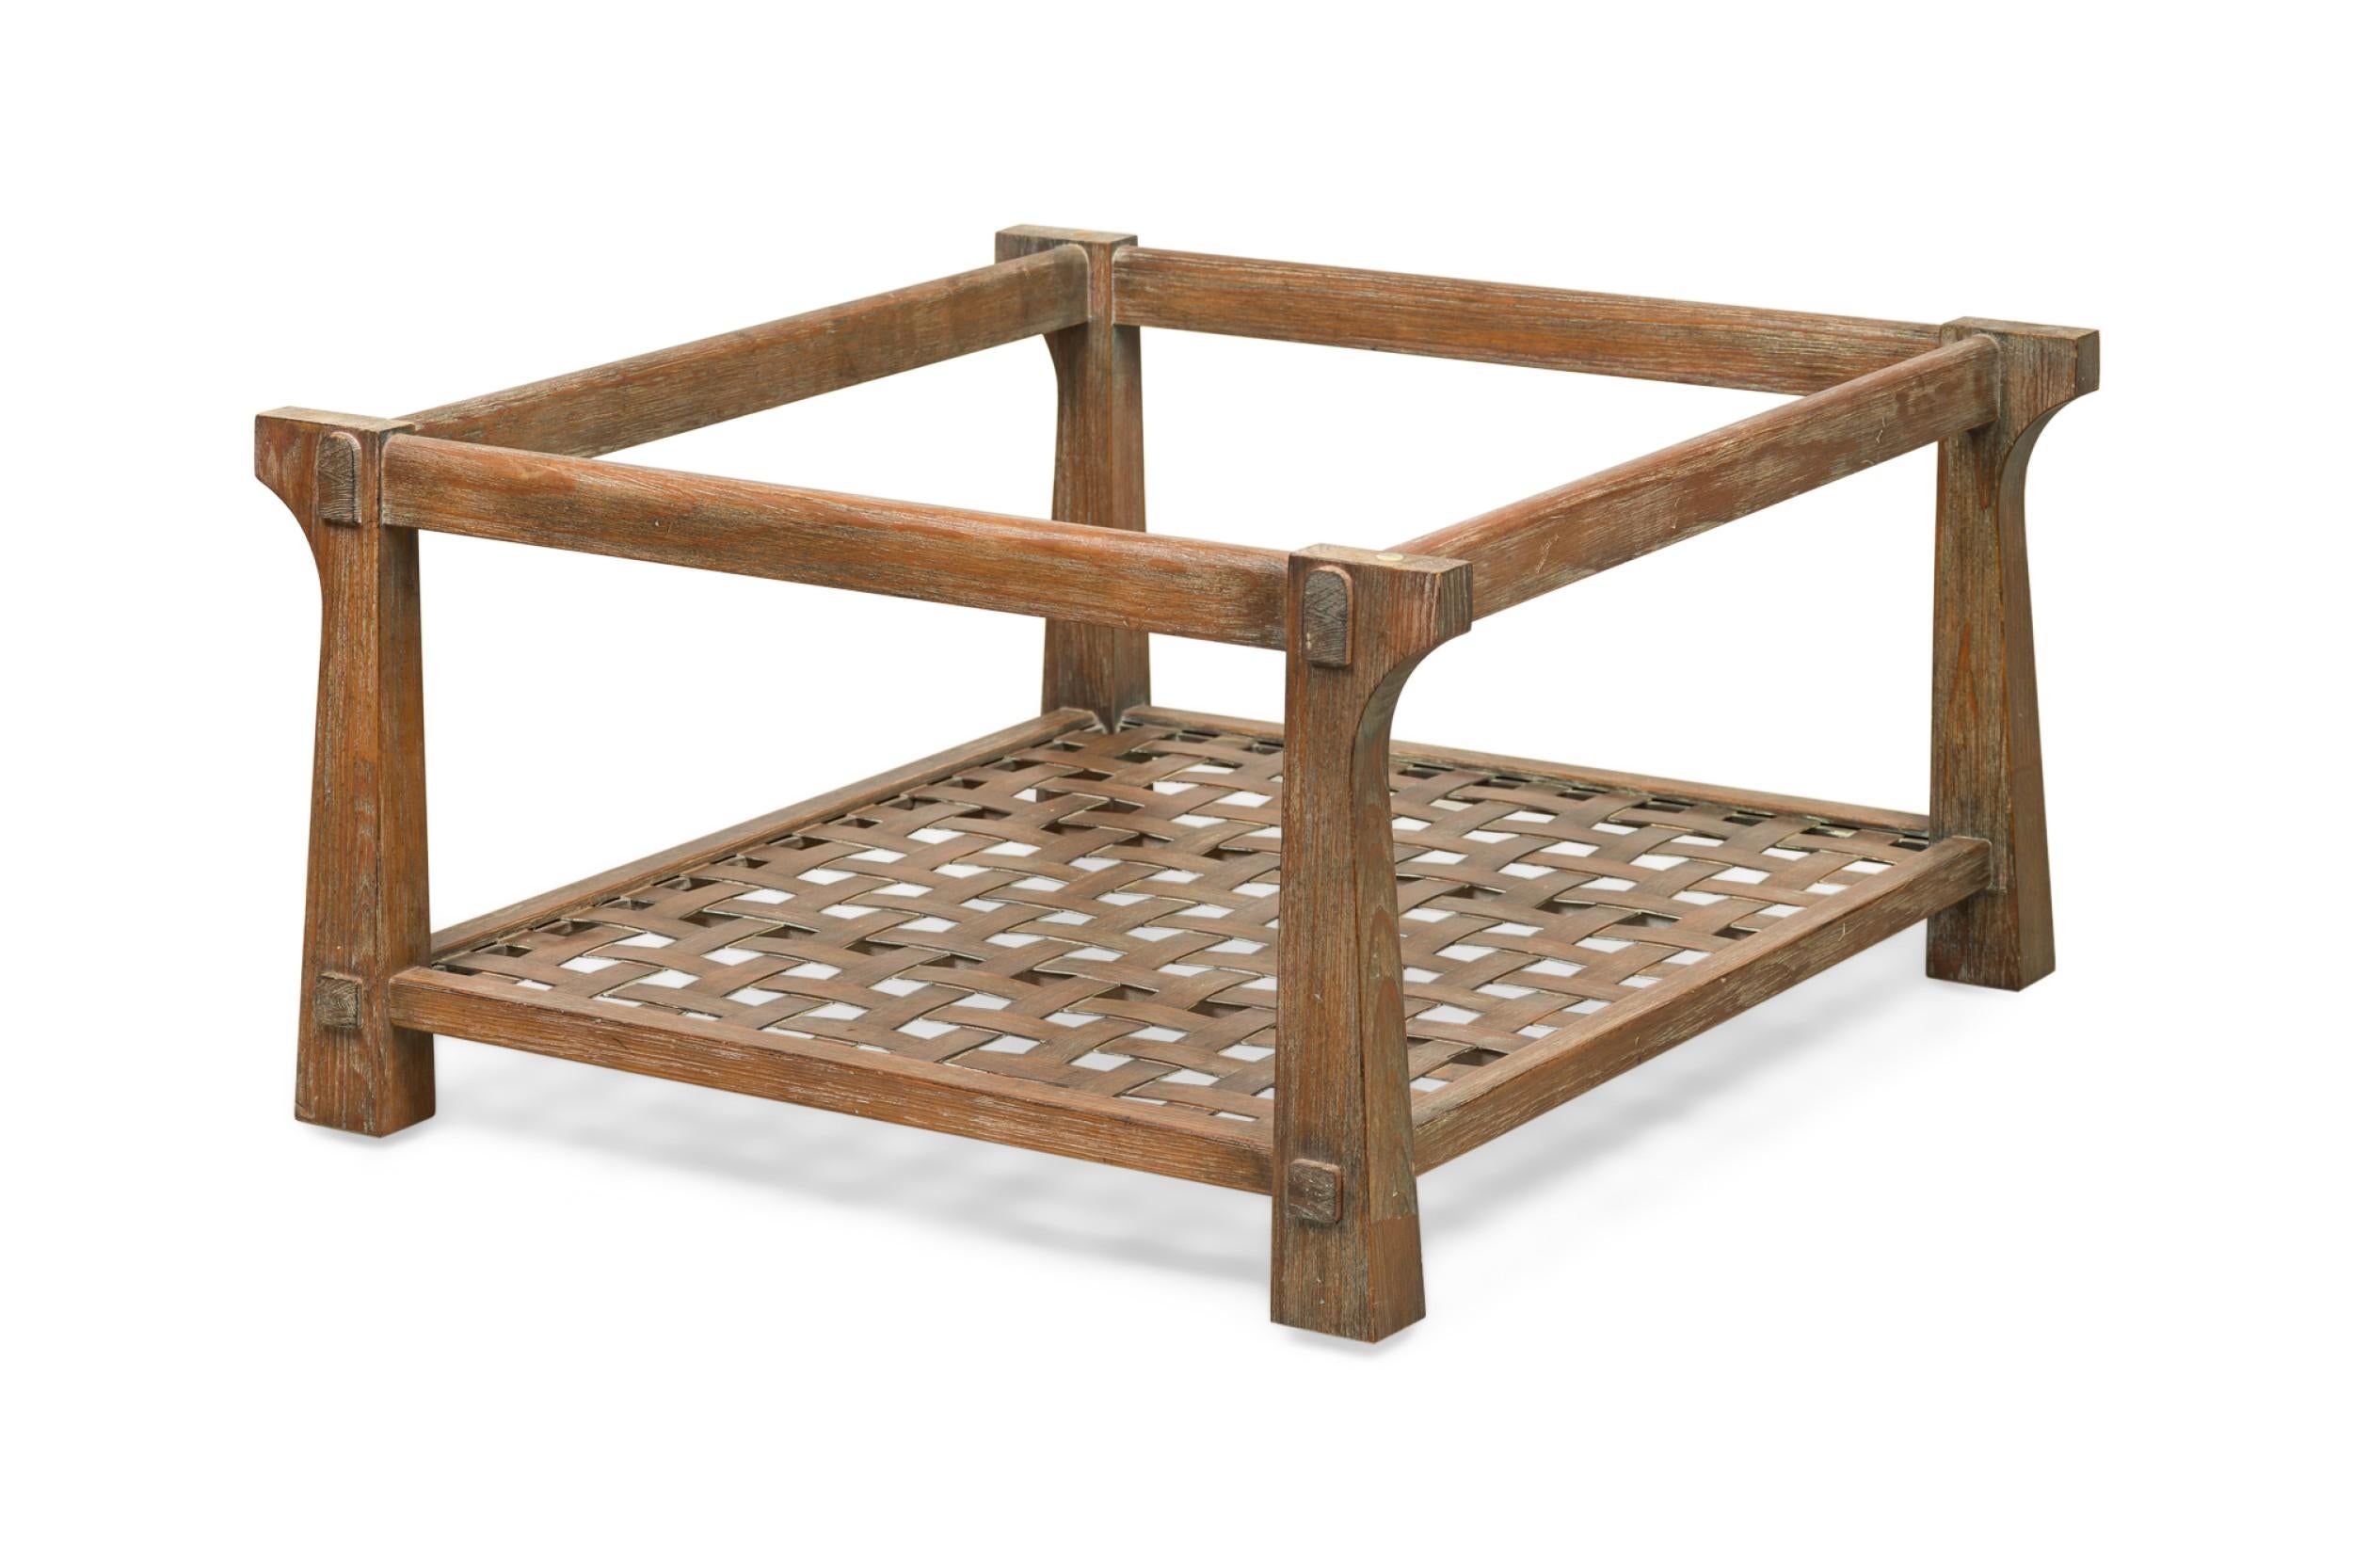 Contemporary American square form cerused wood table frame with distinctly shaped legs tapering toward the top and a caned lower shelf. (NO GLASS TOP: can be made upon request) (JAMIE HERZLINGER)
 

 Frame only, missing top.
